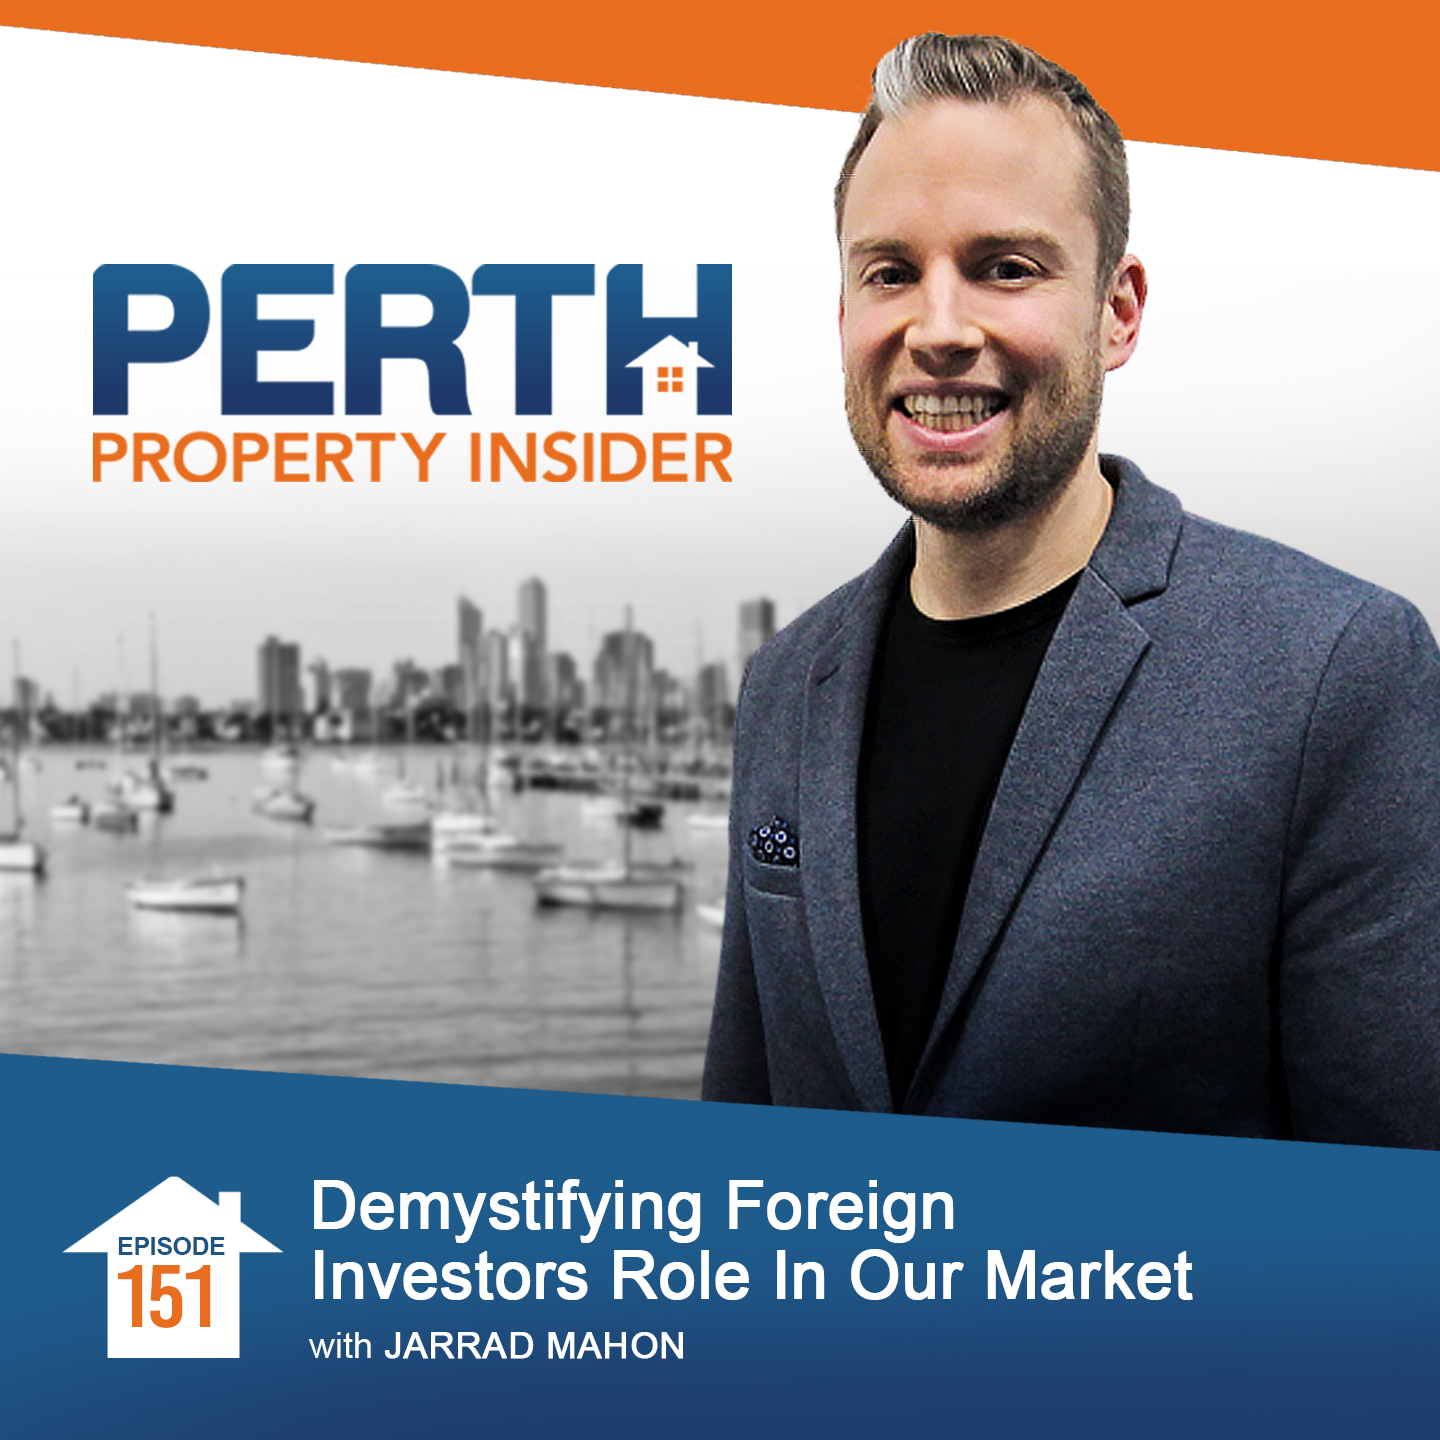 Demystifying Foreign Investors Role In Our Market